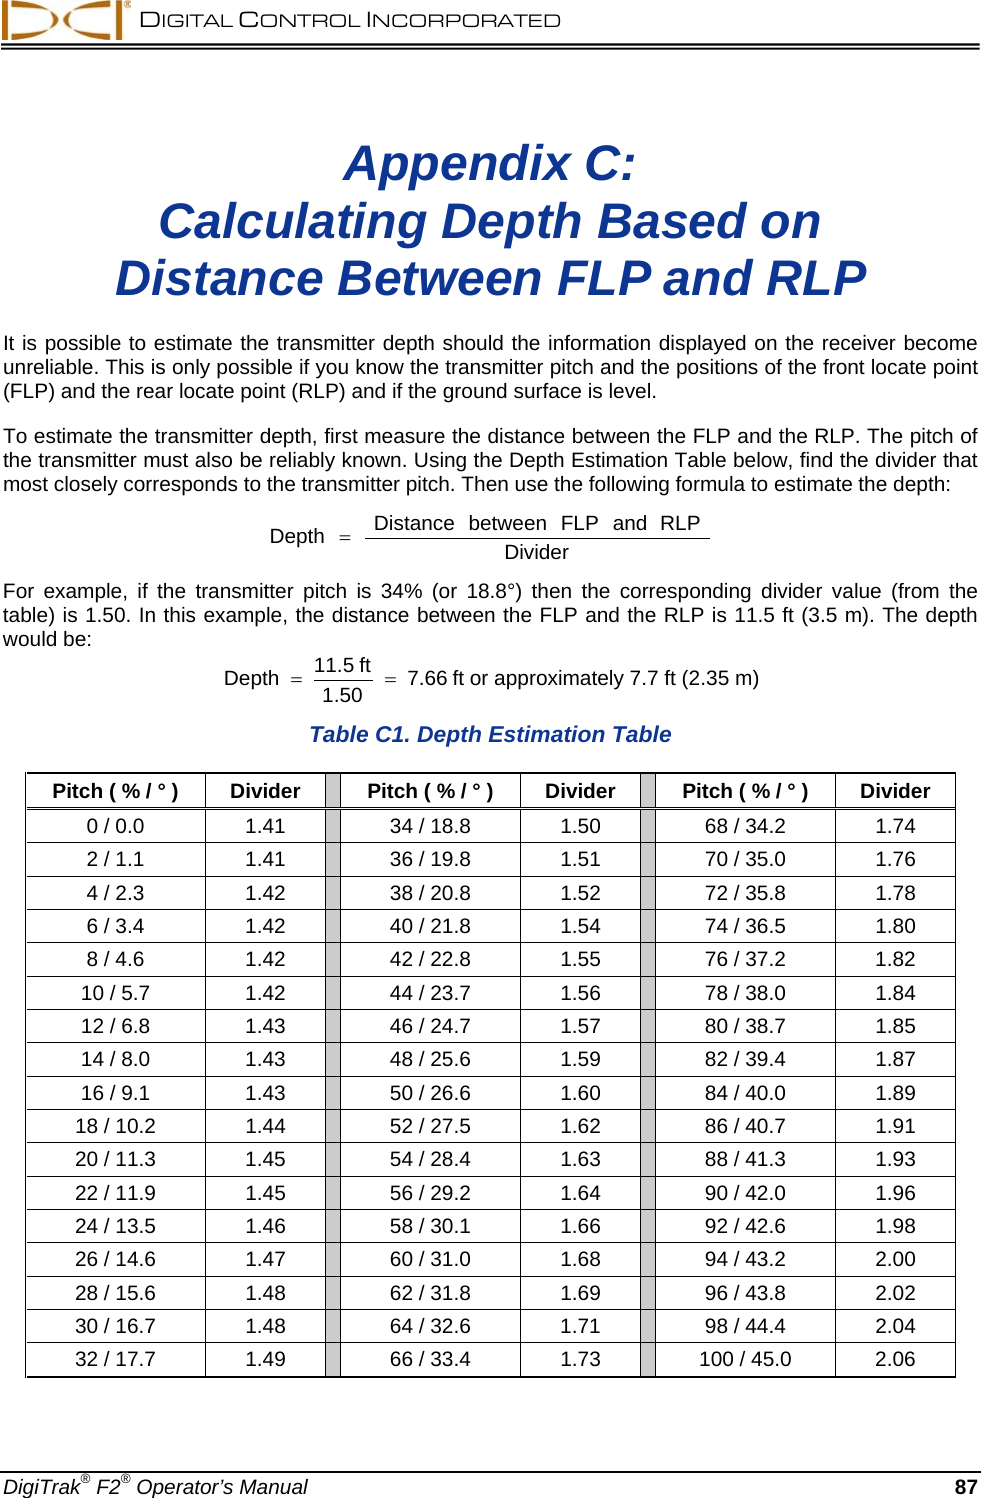  DIGITAL CONTROL INCORPORATED  DigiTrak® F2® Operator’s Manual 87 Appendix C: Calculating Depth Based on Distance Between FLP and RLP  It is possible to estimate the transmitter depth should the information displayed on the receiver become unreliable. This is only possible if you know the transmitter pitch and the positions of the front locate point (FLP) and the rear locate point (RLP) and if the ground surface is level.  To estimate the transmitter depth, first measure the distance between the FLP and the RLP. The pitch of the transmitter must also be reliably known. Using the Depth Estimation Table below, find the divider that most closely corresponds to the transmitter pitch. Then use the following formula to estimate the depth: DividerRLPandFLPbetweenDistanceDepth = For example, if the transmitter pitch is 34% (or 18.8°) then the corresponding divider value (from the table) is 1.50. In this example, the distance between the FLP and the RLP is 11.5 ft (3.5 m). The depth would be: 7.661.50ft 11.5Depth ==ft or approximately 7.7 ft (2.35 m)  Table C1. Depth Estimation Table Pitch ( % / ° ) Divider    Pitch ( % / ° ) Divider    Pitch ( % / ° ) Divider 0 / 0.0 1.41    34 / 18.8 1.50    68 / 34.2 1.74 2 / 1.1 1.41    36 / 19.8 1.51    70 / 35.0 1.76 4 / 2.3 1.42    38 / 20.8 1.52    72 / 35.8 1.78 6 / 3.4 1.42    40 / 21.8 1.54    74 / 36.5 1.80 8 / 4.6 1.42    42 / 22.8 1.55    76 / 37.2 1.82 10 / 5.7 1.42    44 / 23.7 1.56    78 / 38.0 1.84 12 / 6.8 1.43    46 / 24.7 1.57    80 / 38.7 1.85 14 / 8.0 1.43    48 / 25.6 1.59    82 / 39.4 1.87 16 / 9.1 1.43    50 / 26.6 1.60    84 / 40.0 1.89 18 / 10.2 1.44    52 / 27.5 1.62    86 / 40.7 1.91 20 / 11.3 1.45    54 / 28.4 1.63    88 / 41.3 1.93 22 / 11.9 1.45    56 / 29.2 1.64    90 / 42.0 1.96 24 / 13.5 1.46    58 / 30.1 1.66    92 / 42.6 1.98 26 / 14.6 1.47    60 / 31.0 1.68    94 / 43.2 2.00 28 / 15.6 1.48    62 / 31.8 1.69    96 / 43.8 2.02 30 / 16.7 1.48    64 / 32.6 1.71    98 / 44.4 2.04 32 / 17.7 1.49    66 / 33.4 1.73    100 / 45.0 2.06  